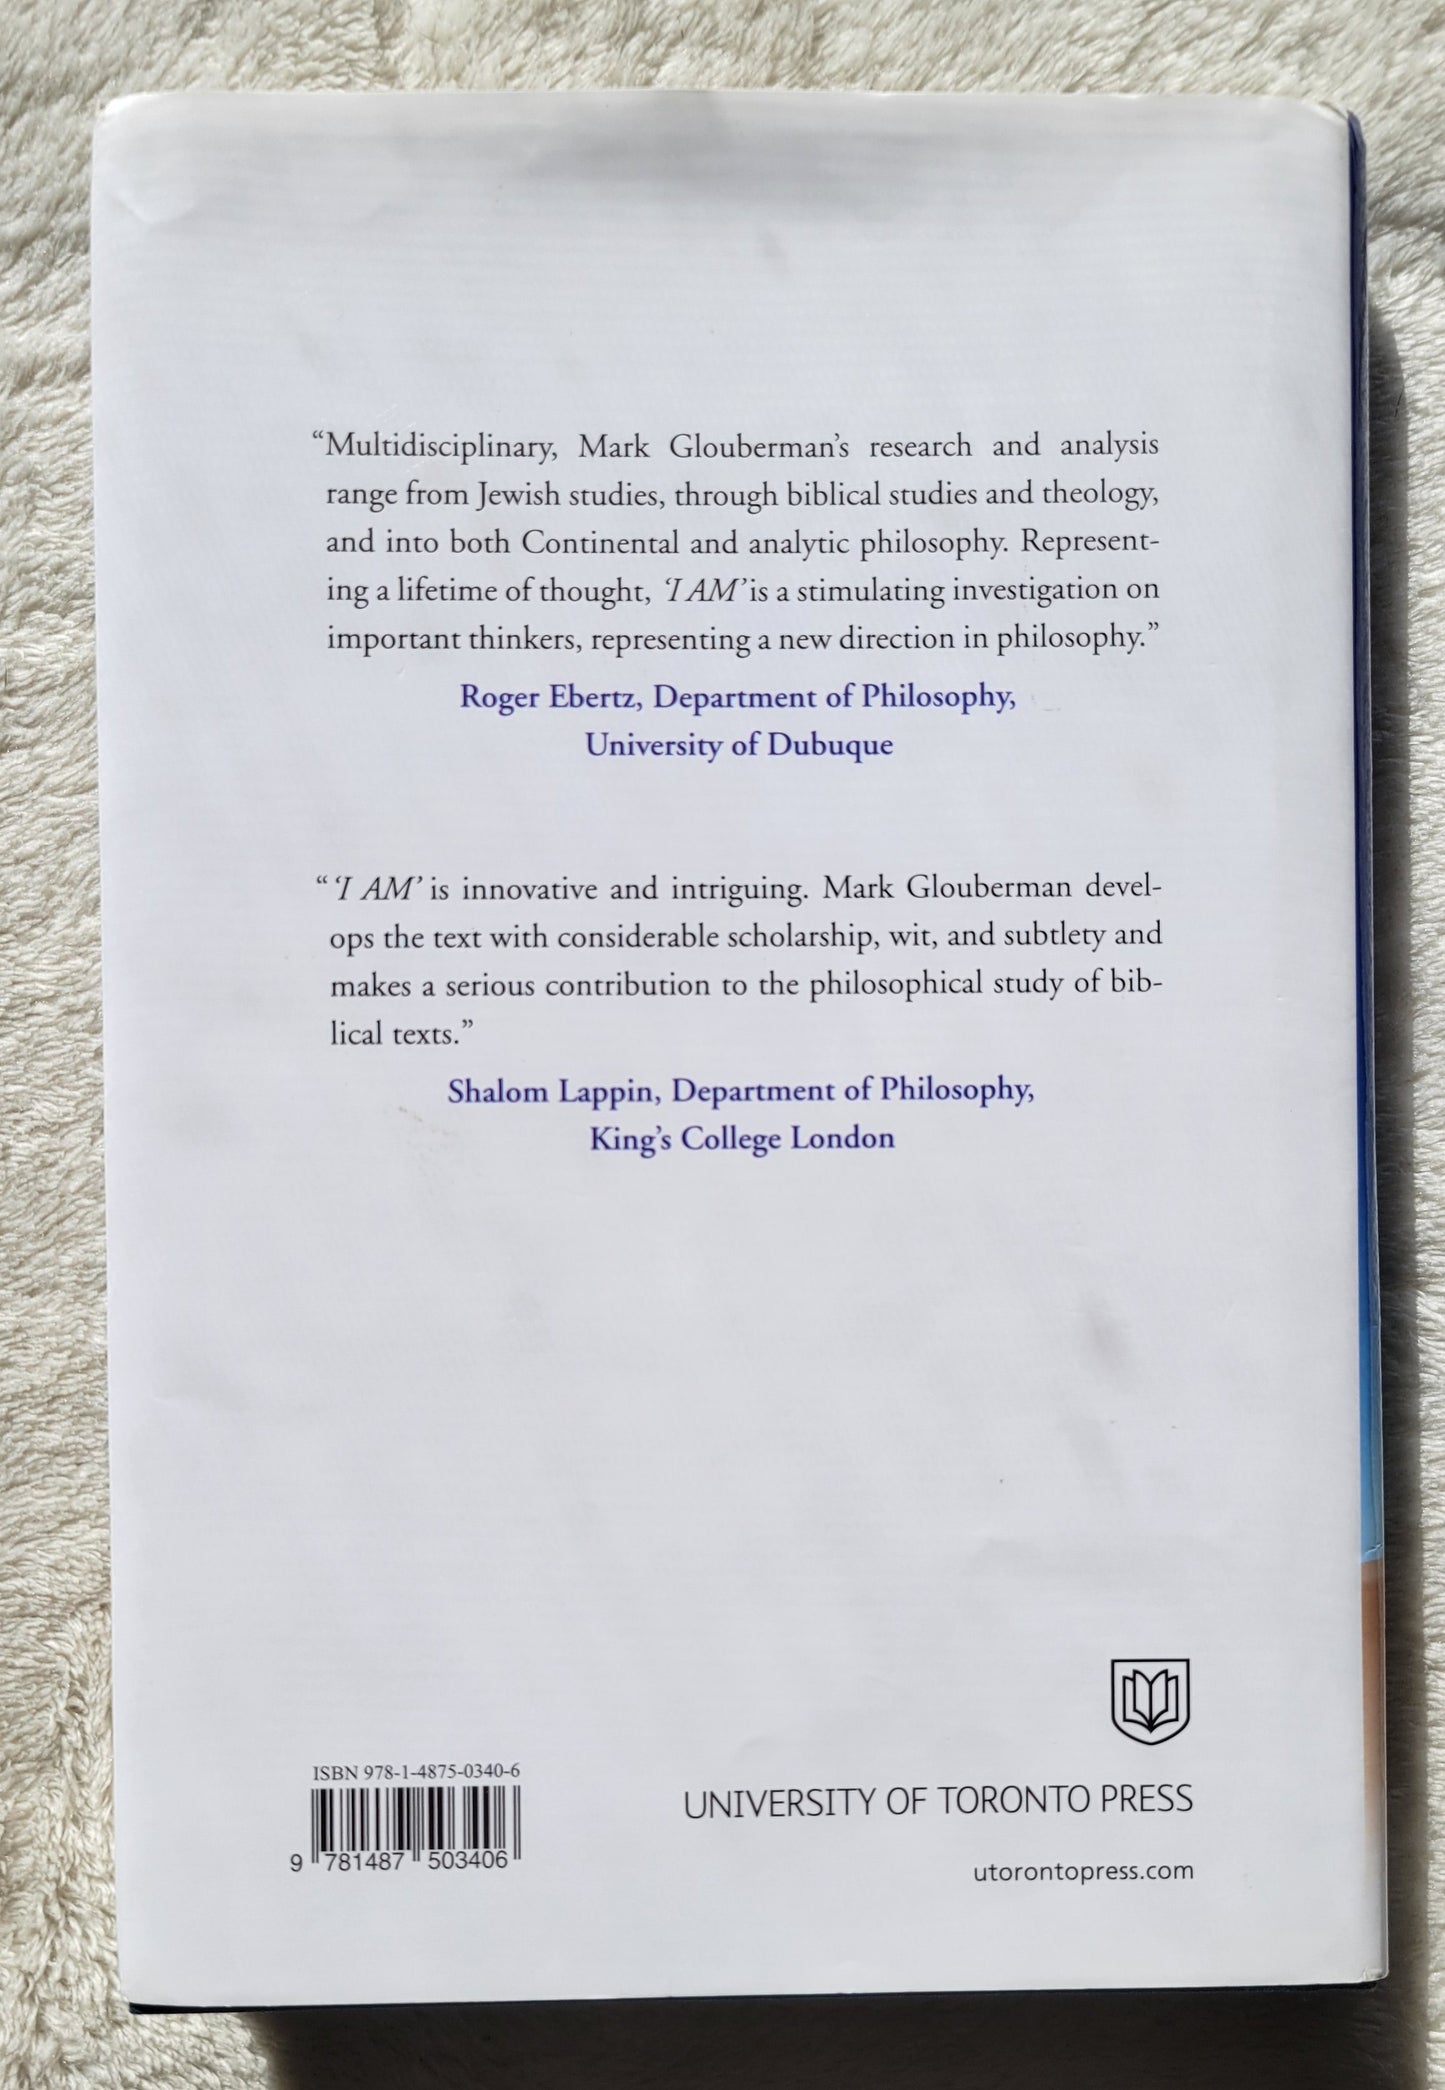 Used book for sale "I Am: Monotheism and the Philosophy of the Bible" by Mark Glouberman, University of Toronto Press, 2019. View of back cover.